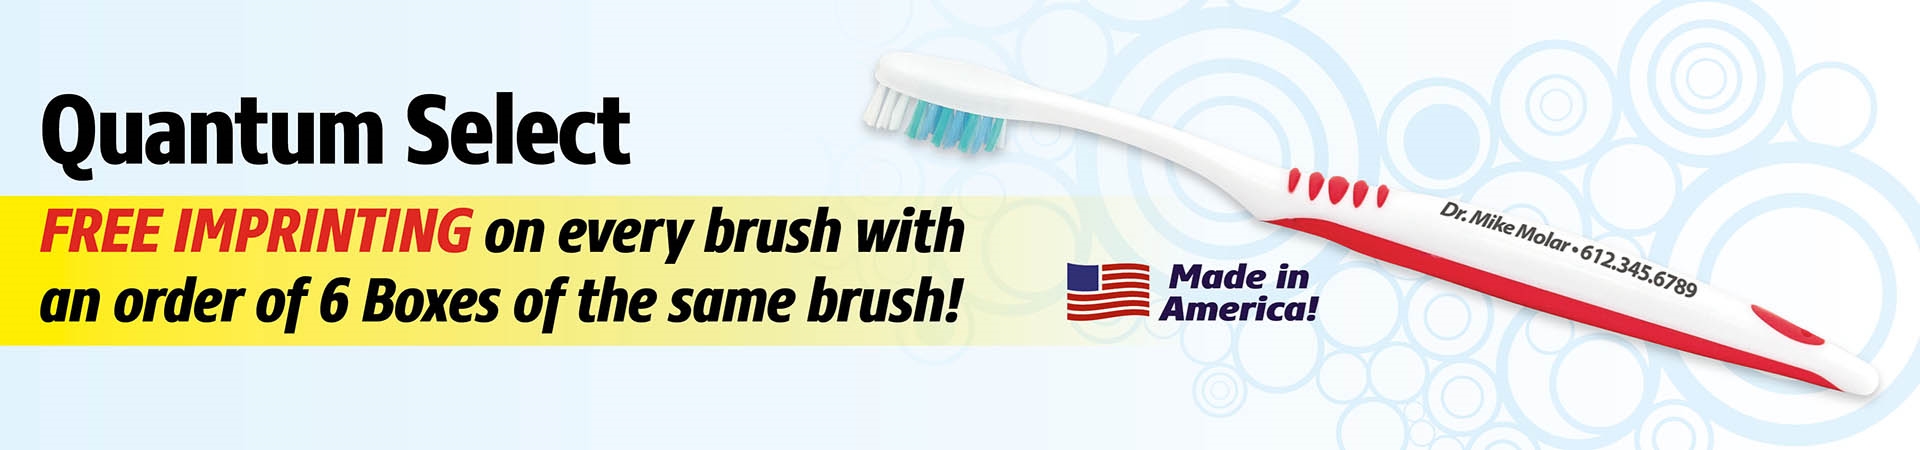 Made in USA bulk wholesale toothbrushes